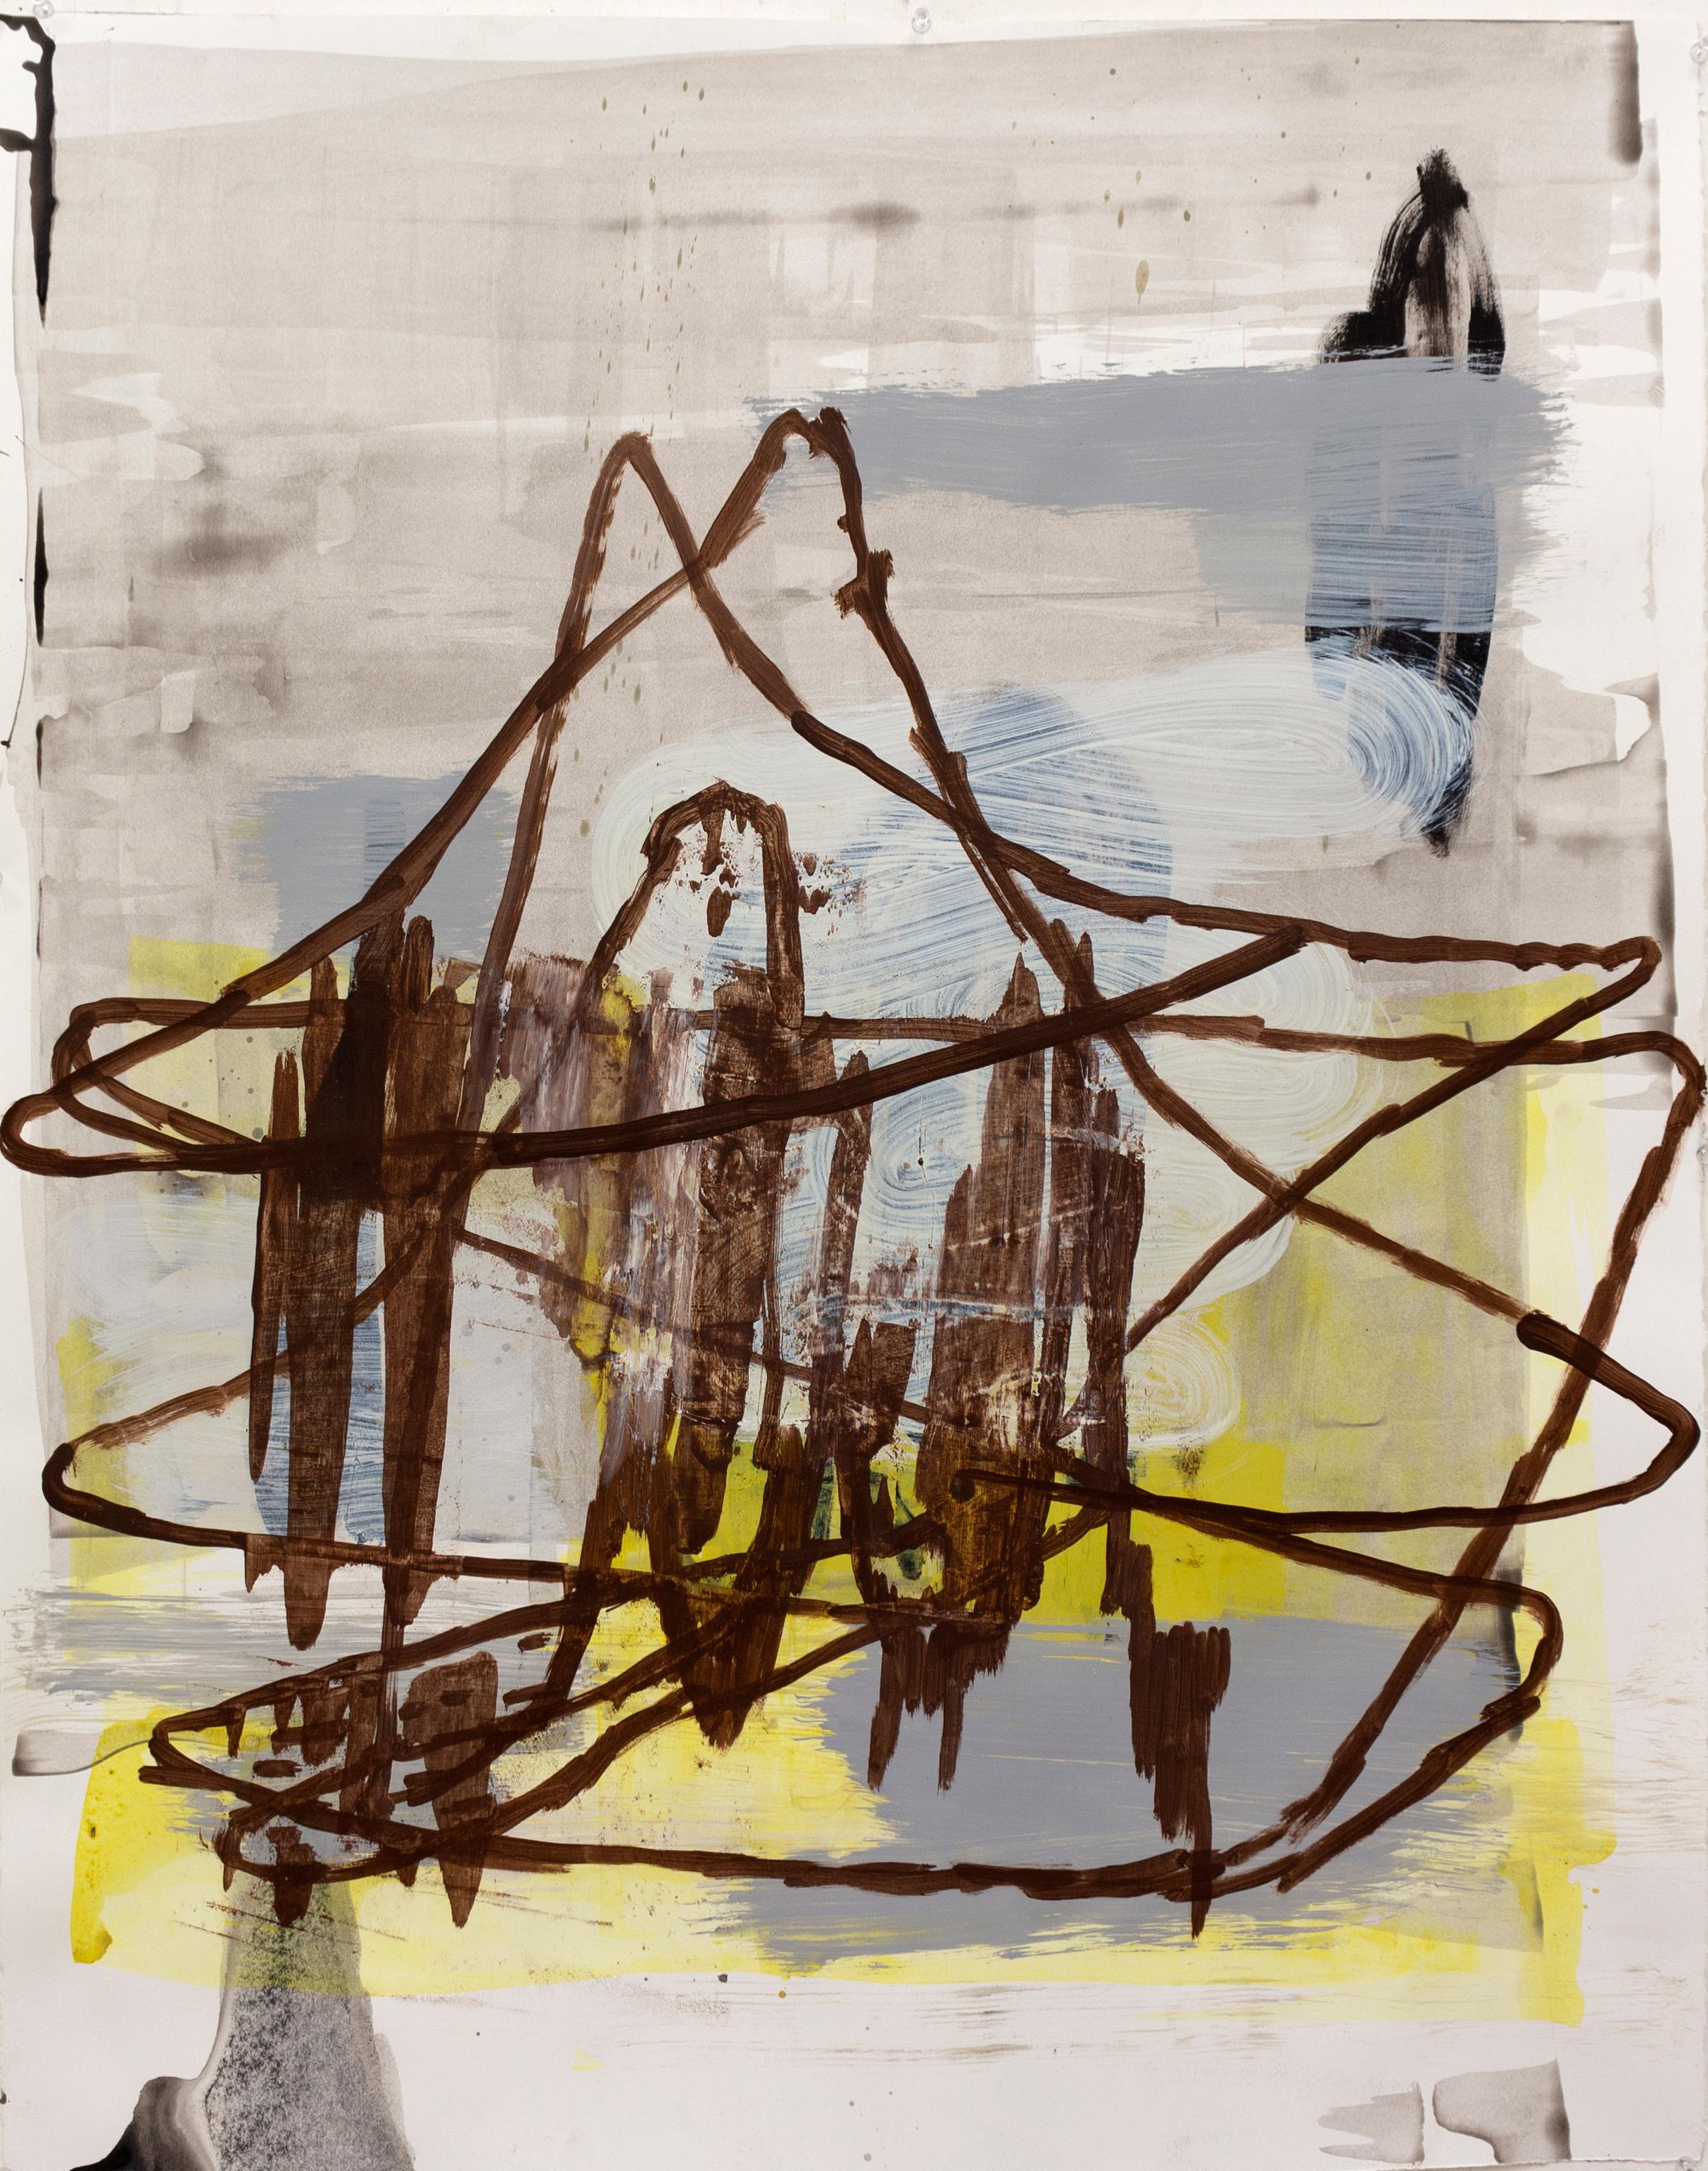 Deborah Dancy
State of Being 17, 2021
acrylic on paper
38 x 30 in.
(dan039)

This original contemporary abstract work on paper by Deborah Dancy is comprised of grey, brown, white, blue, yellow, and black hues, in her signature built up/re-built